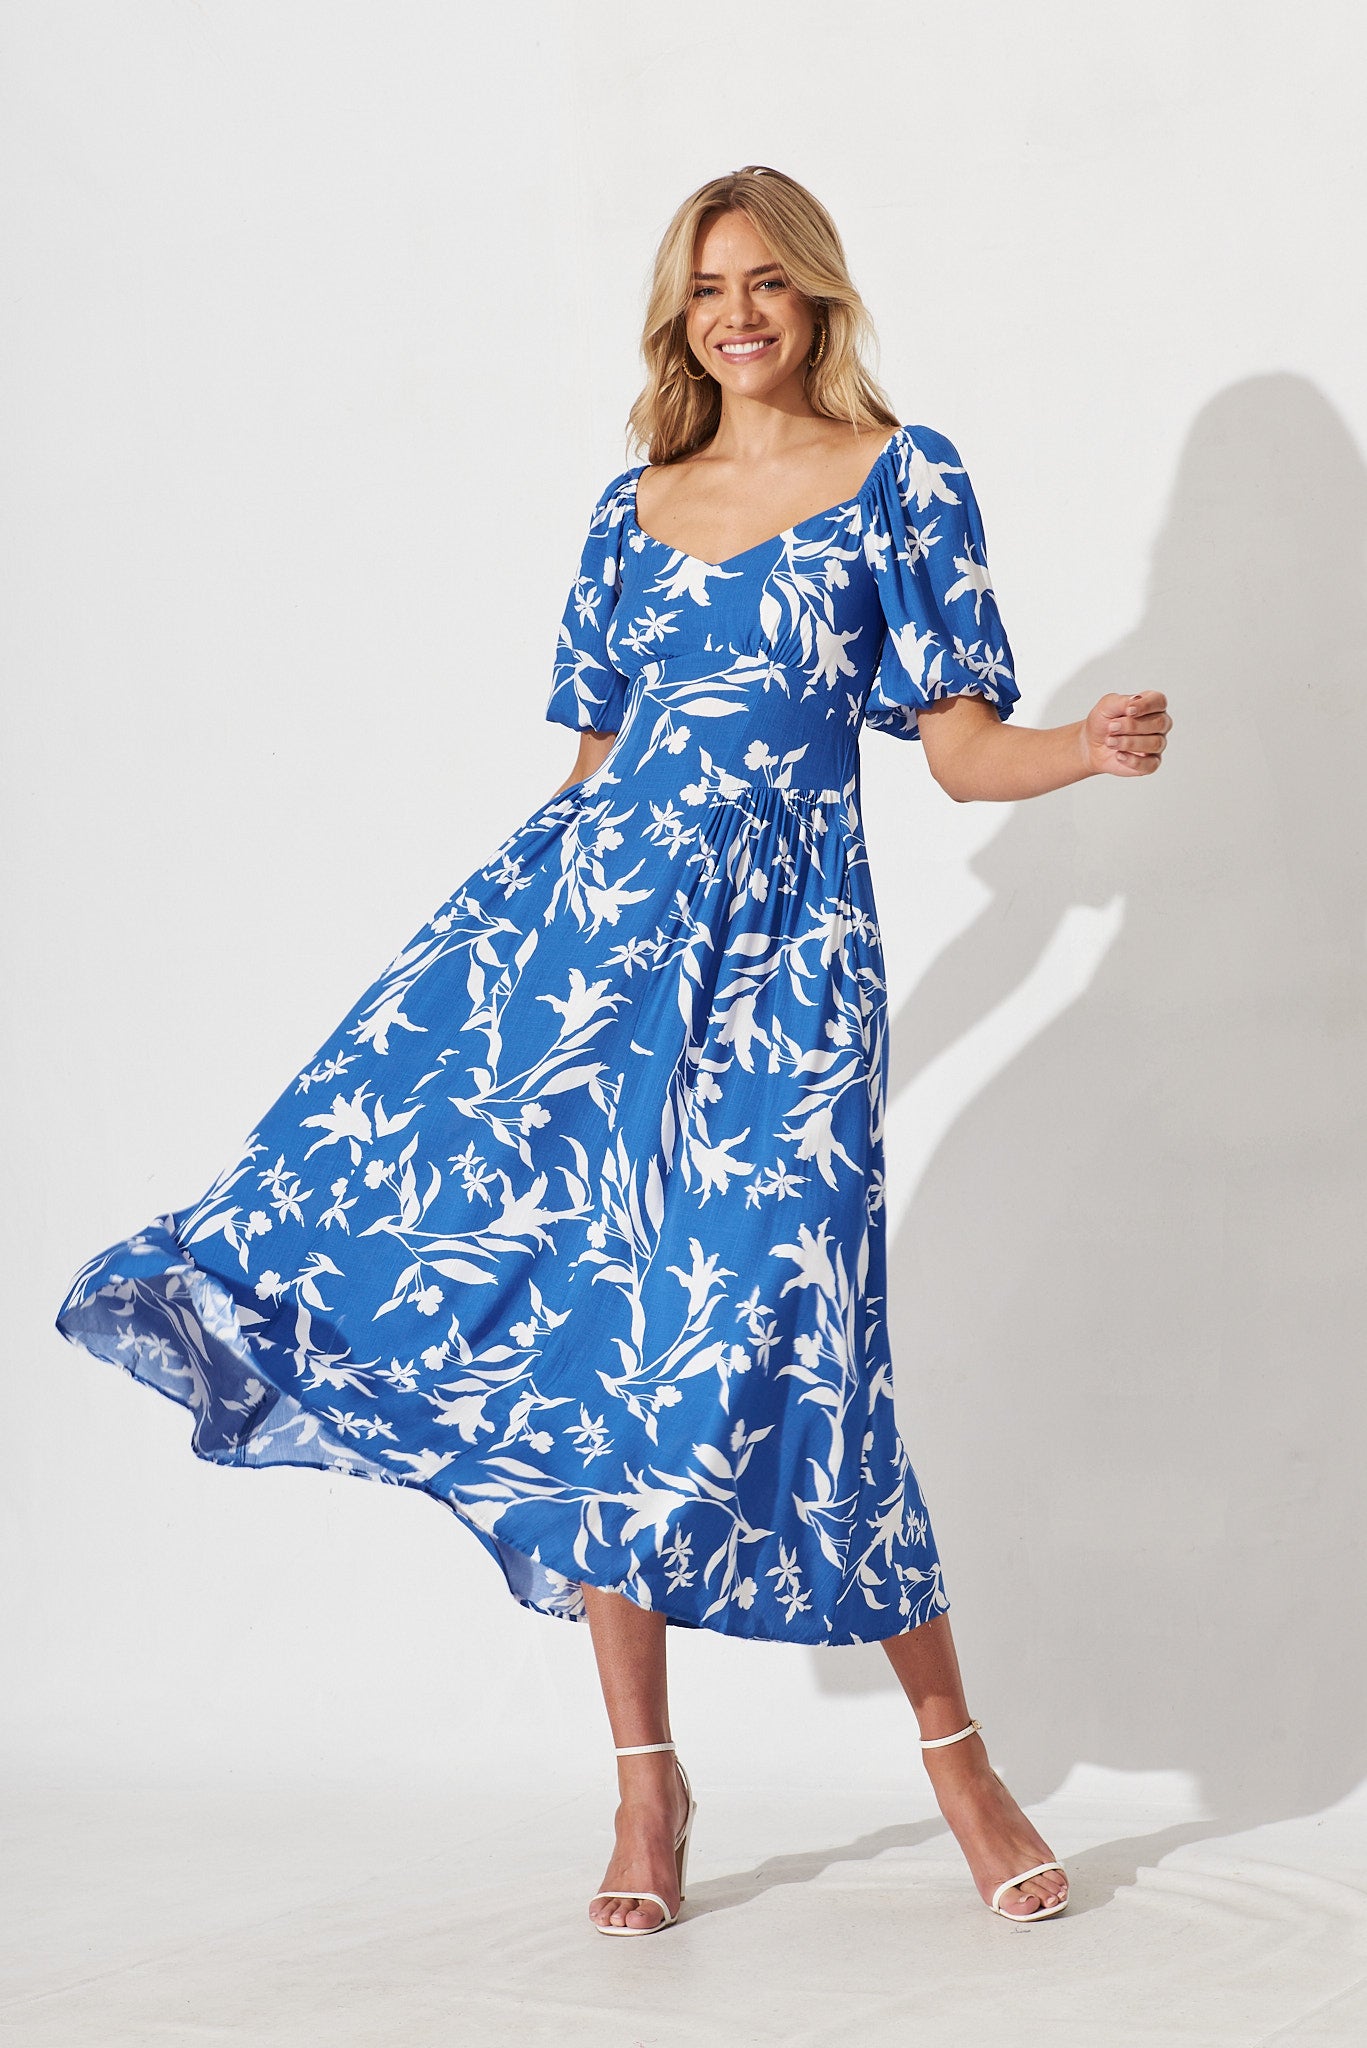 Bern Maxi Dress In Blue With White Floral - full length